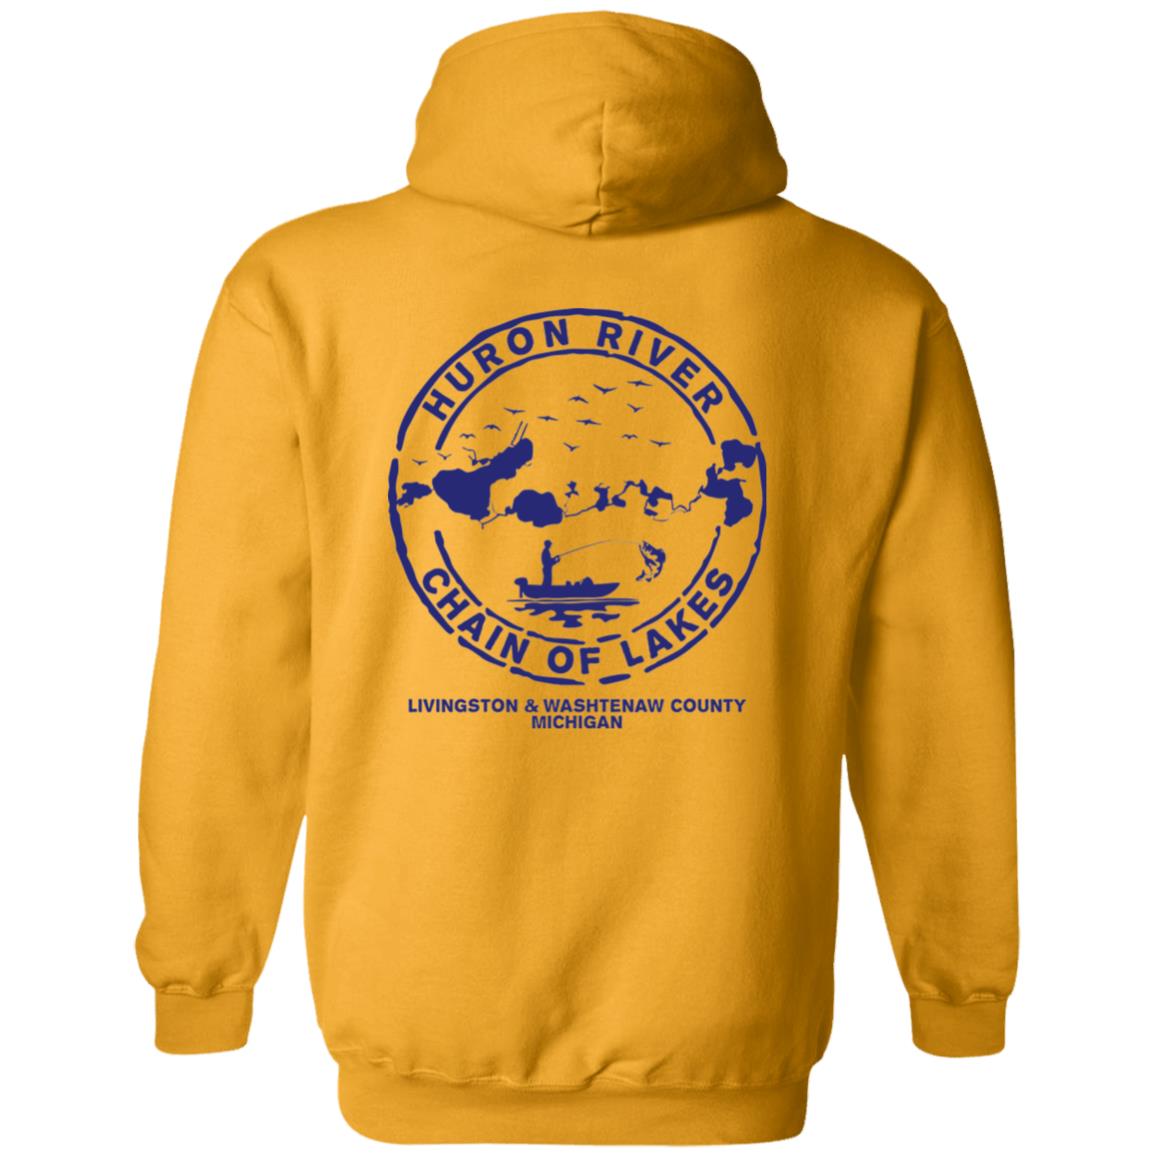 HRCL FL - Navy Don't Be A Wanker - 2 Sided G185 Pullover Hoodie